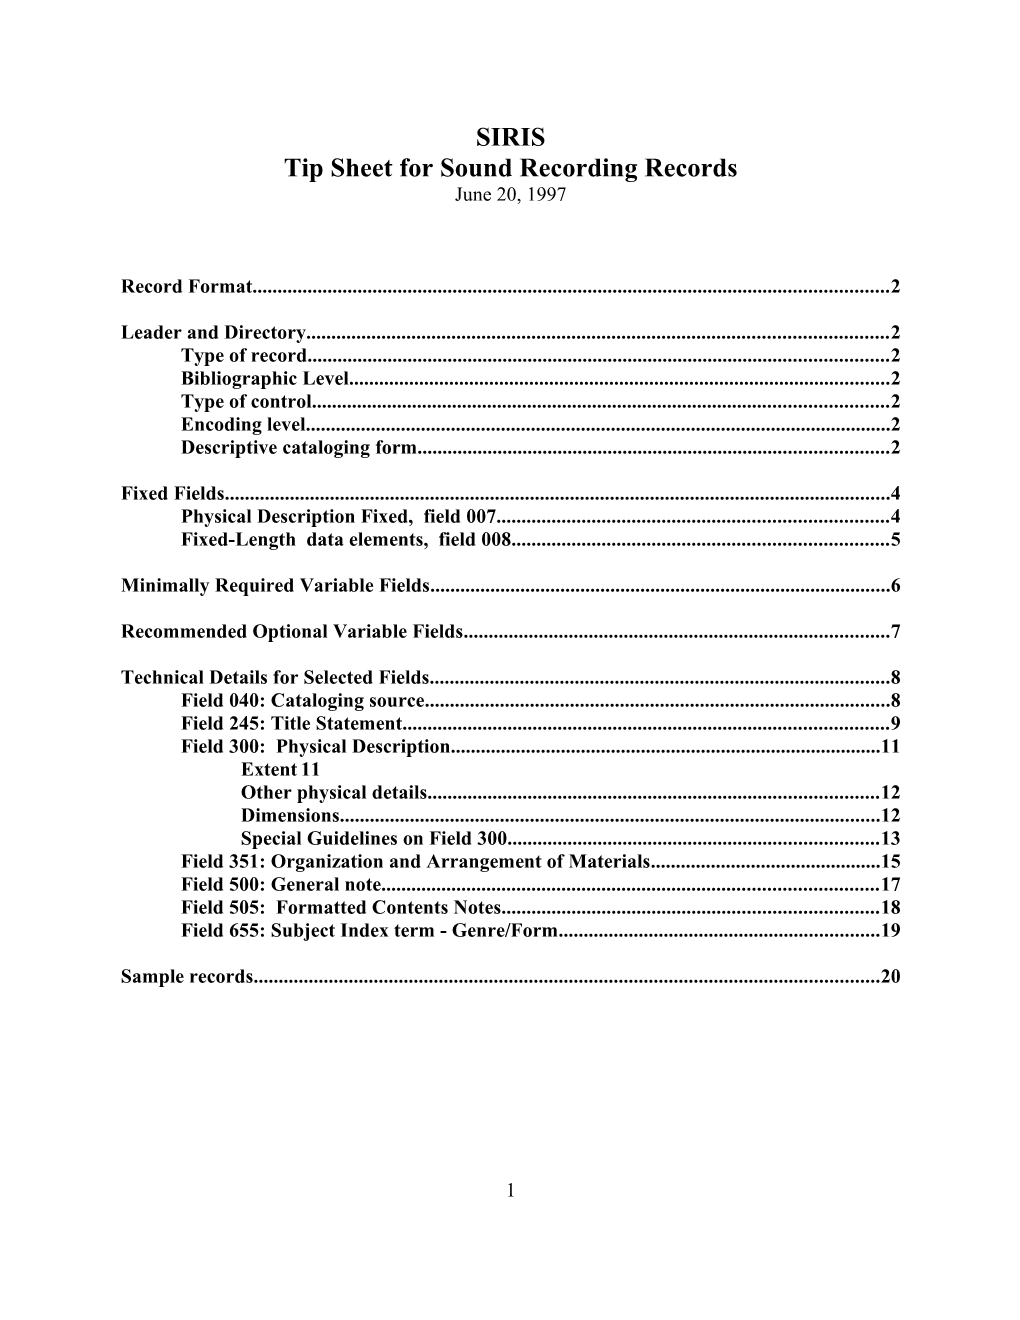 Tip Sheet for Sound Recording Records